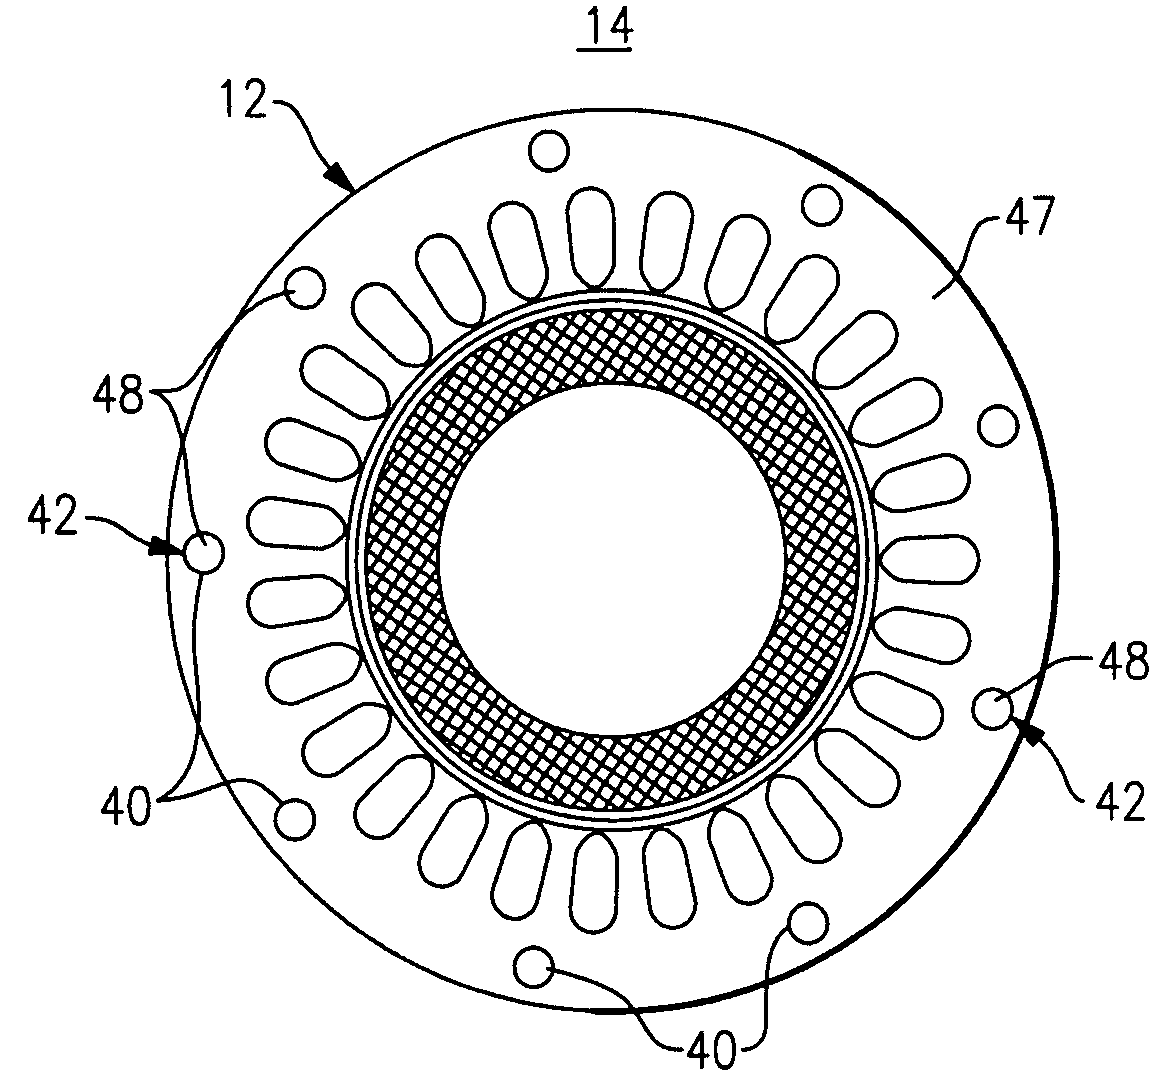 Fault-tolerant permanent magnet machine with reconfigurable flux paths in stator back iron